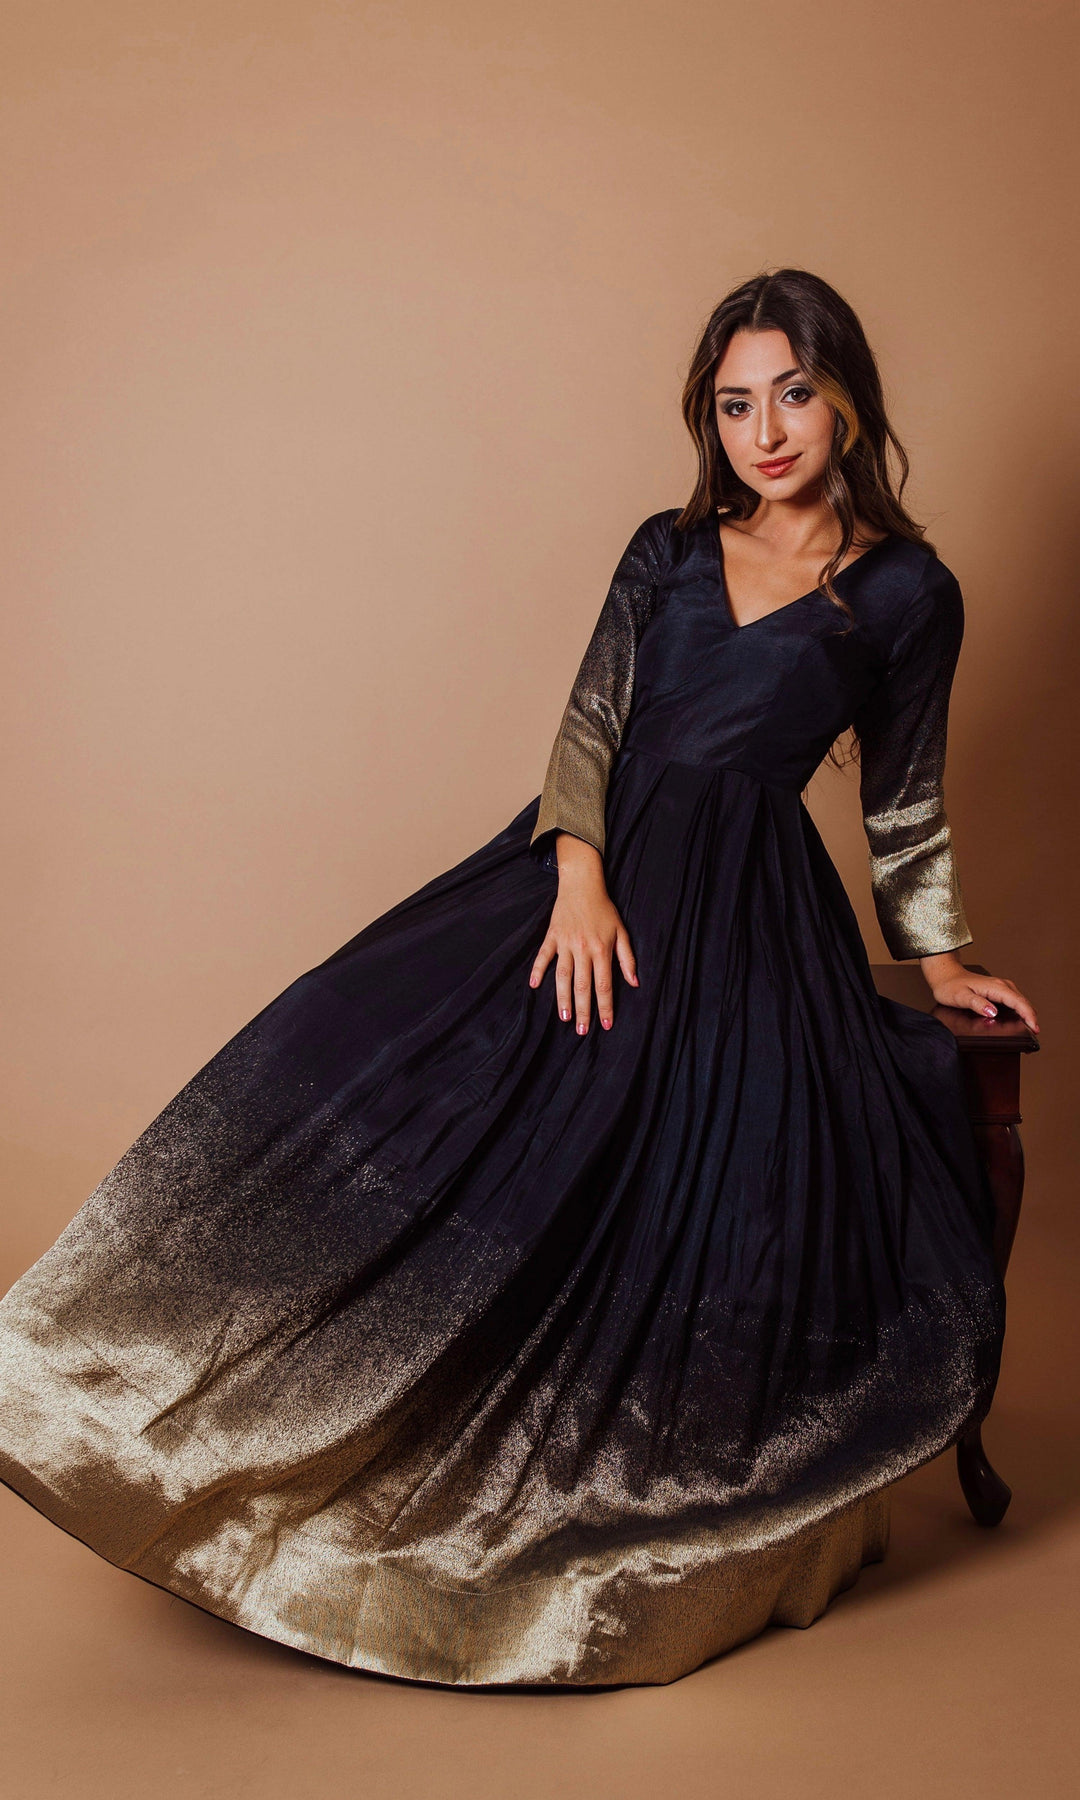 Buy Latest Navy Blue Color Indian Gown Online at Best Price